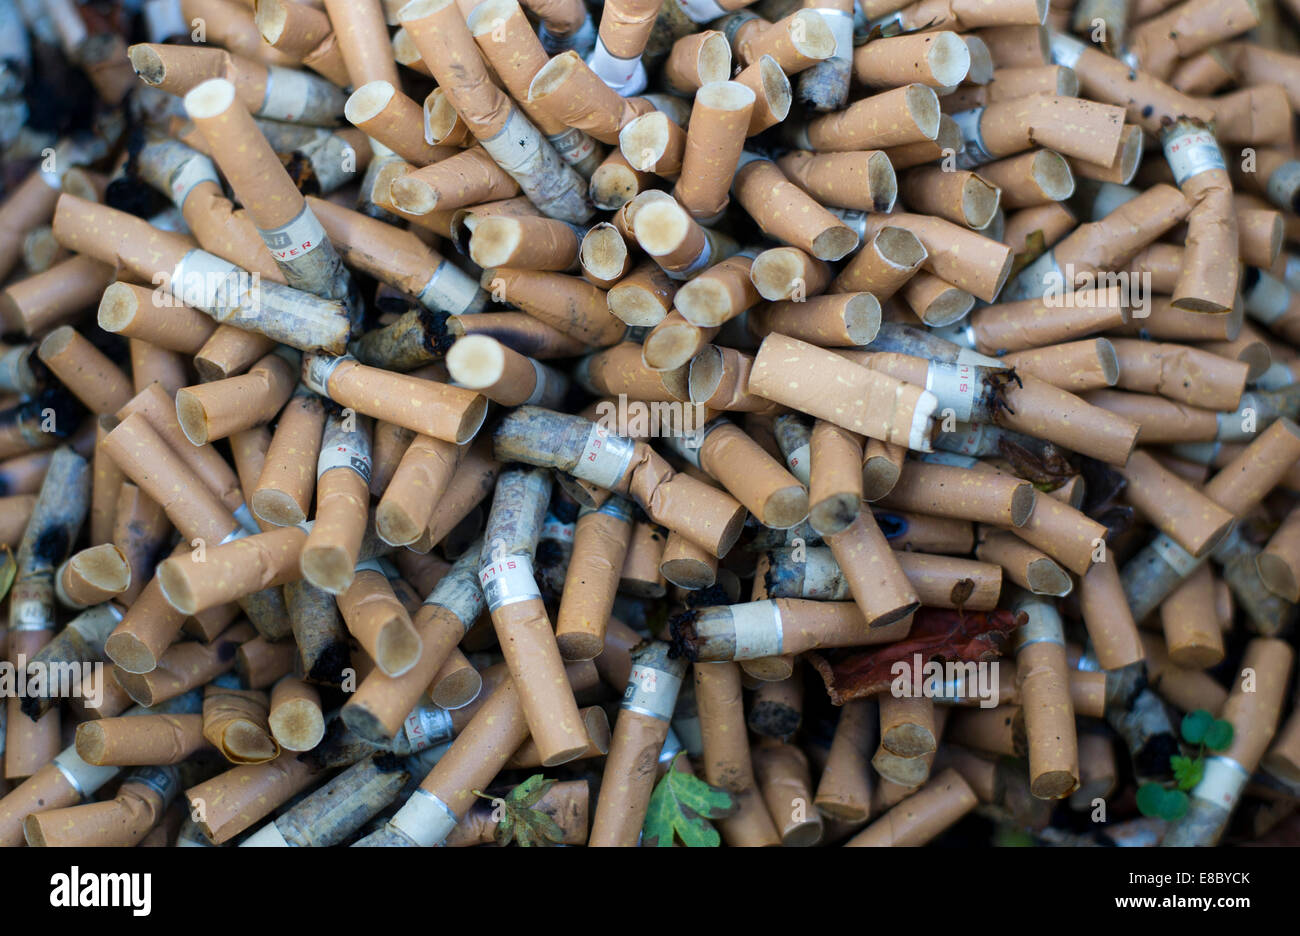 A pile of used cigarette butts Stock Photo